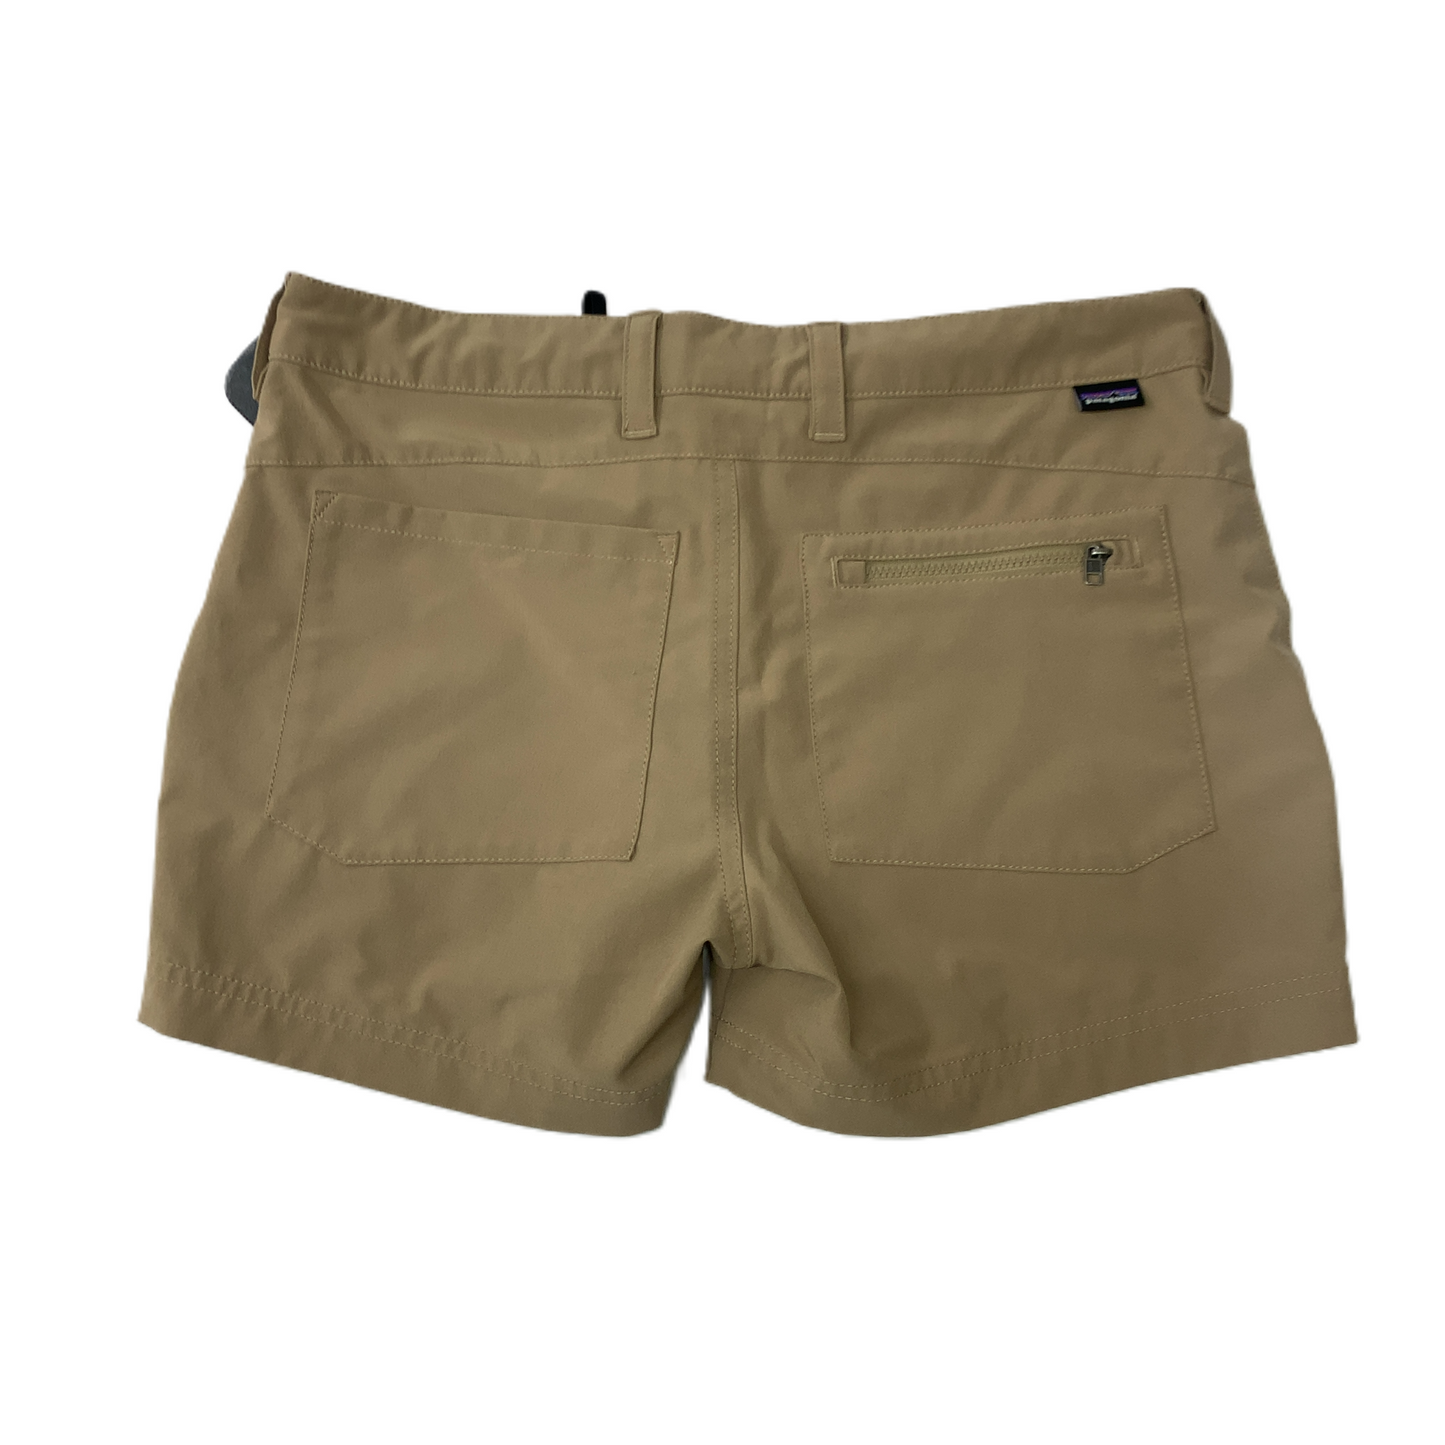 Shorts By Patagonia  Size: 0